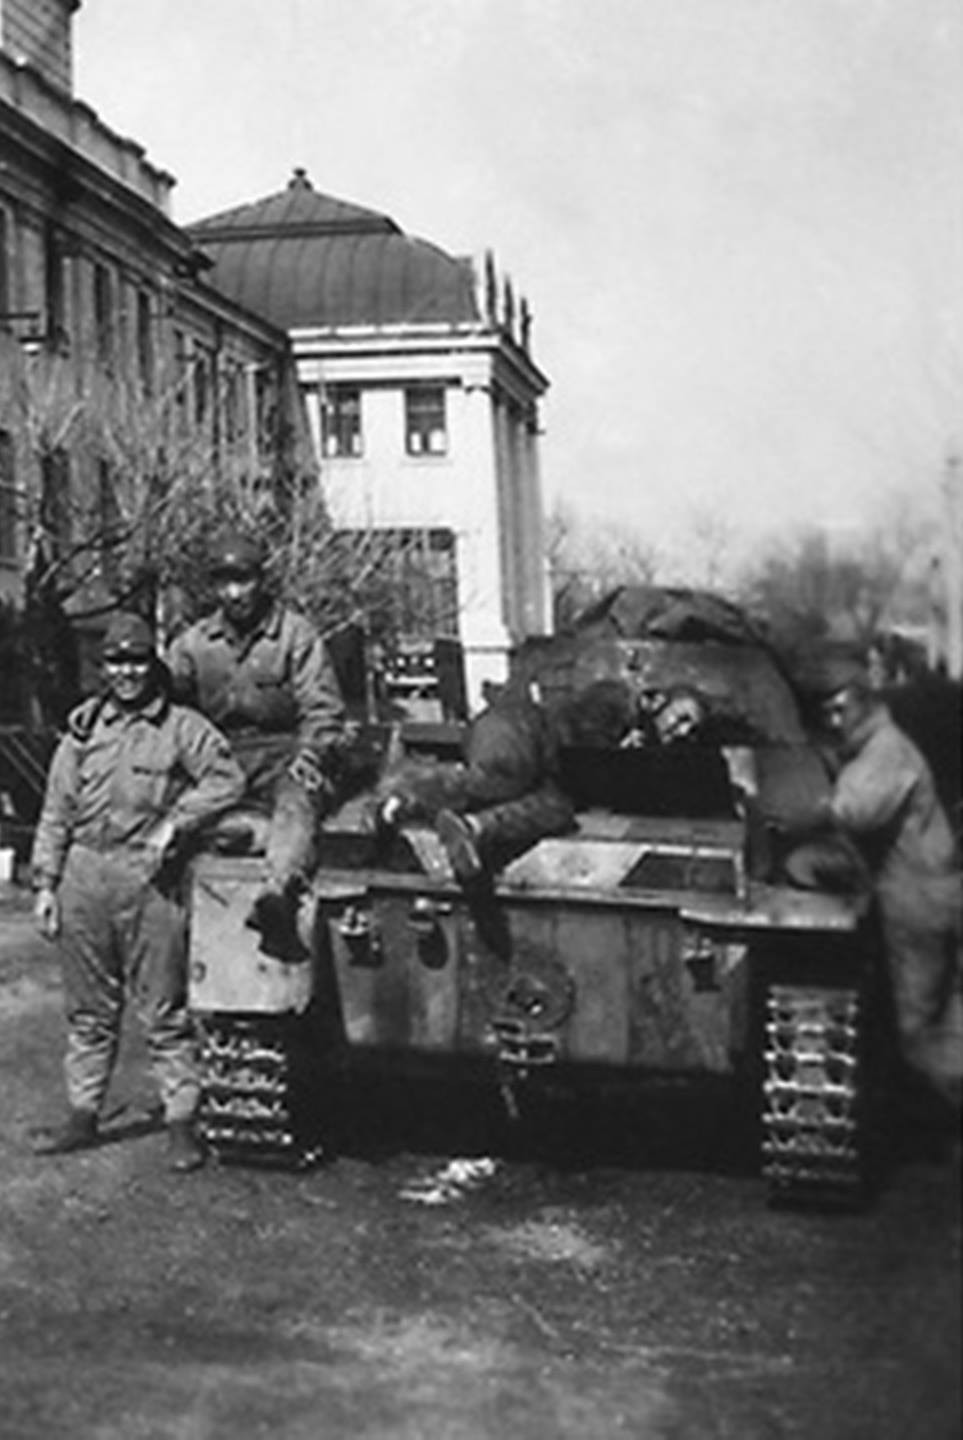 Japanese troops posing with a captured Chinese Panzer I Ausf A tank, Nanjing, mid-Dec 1937